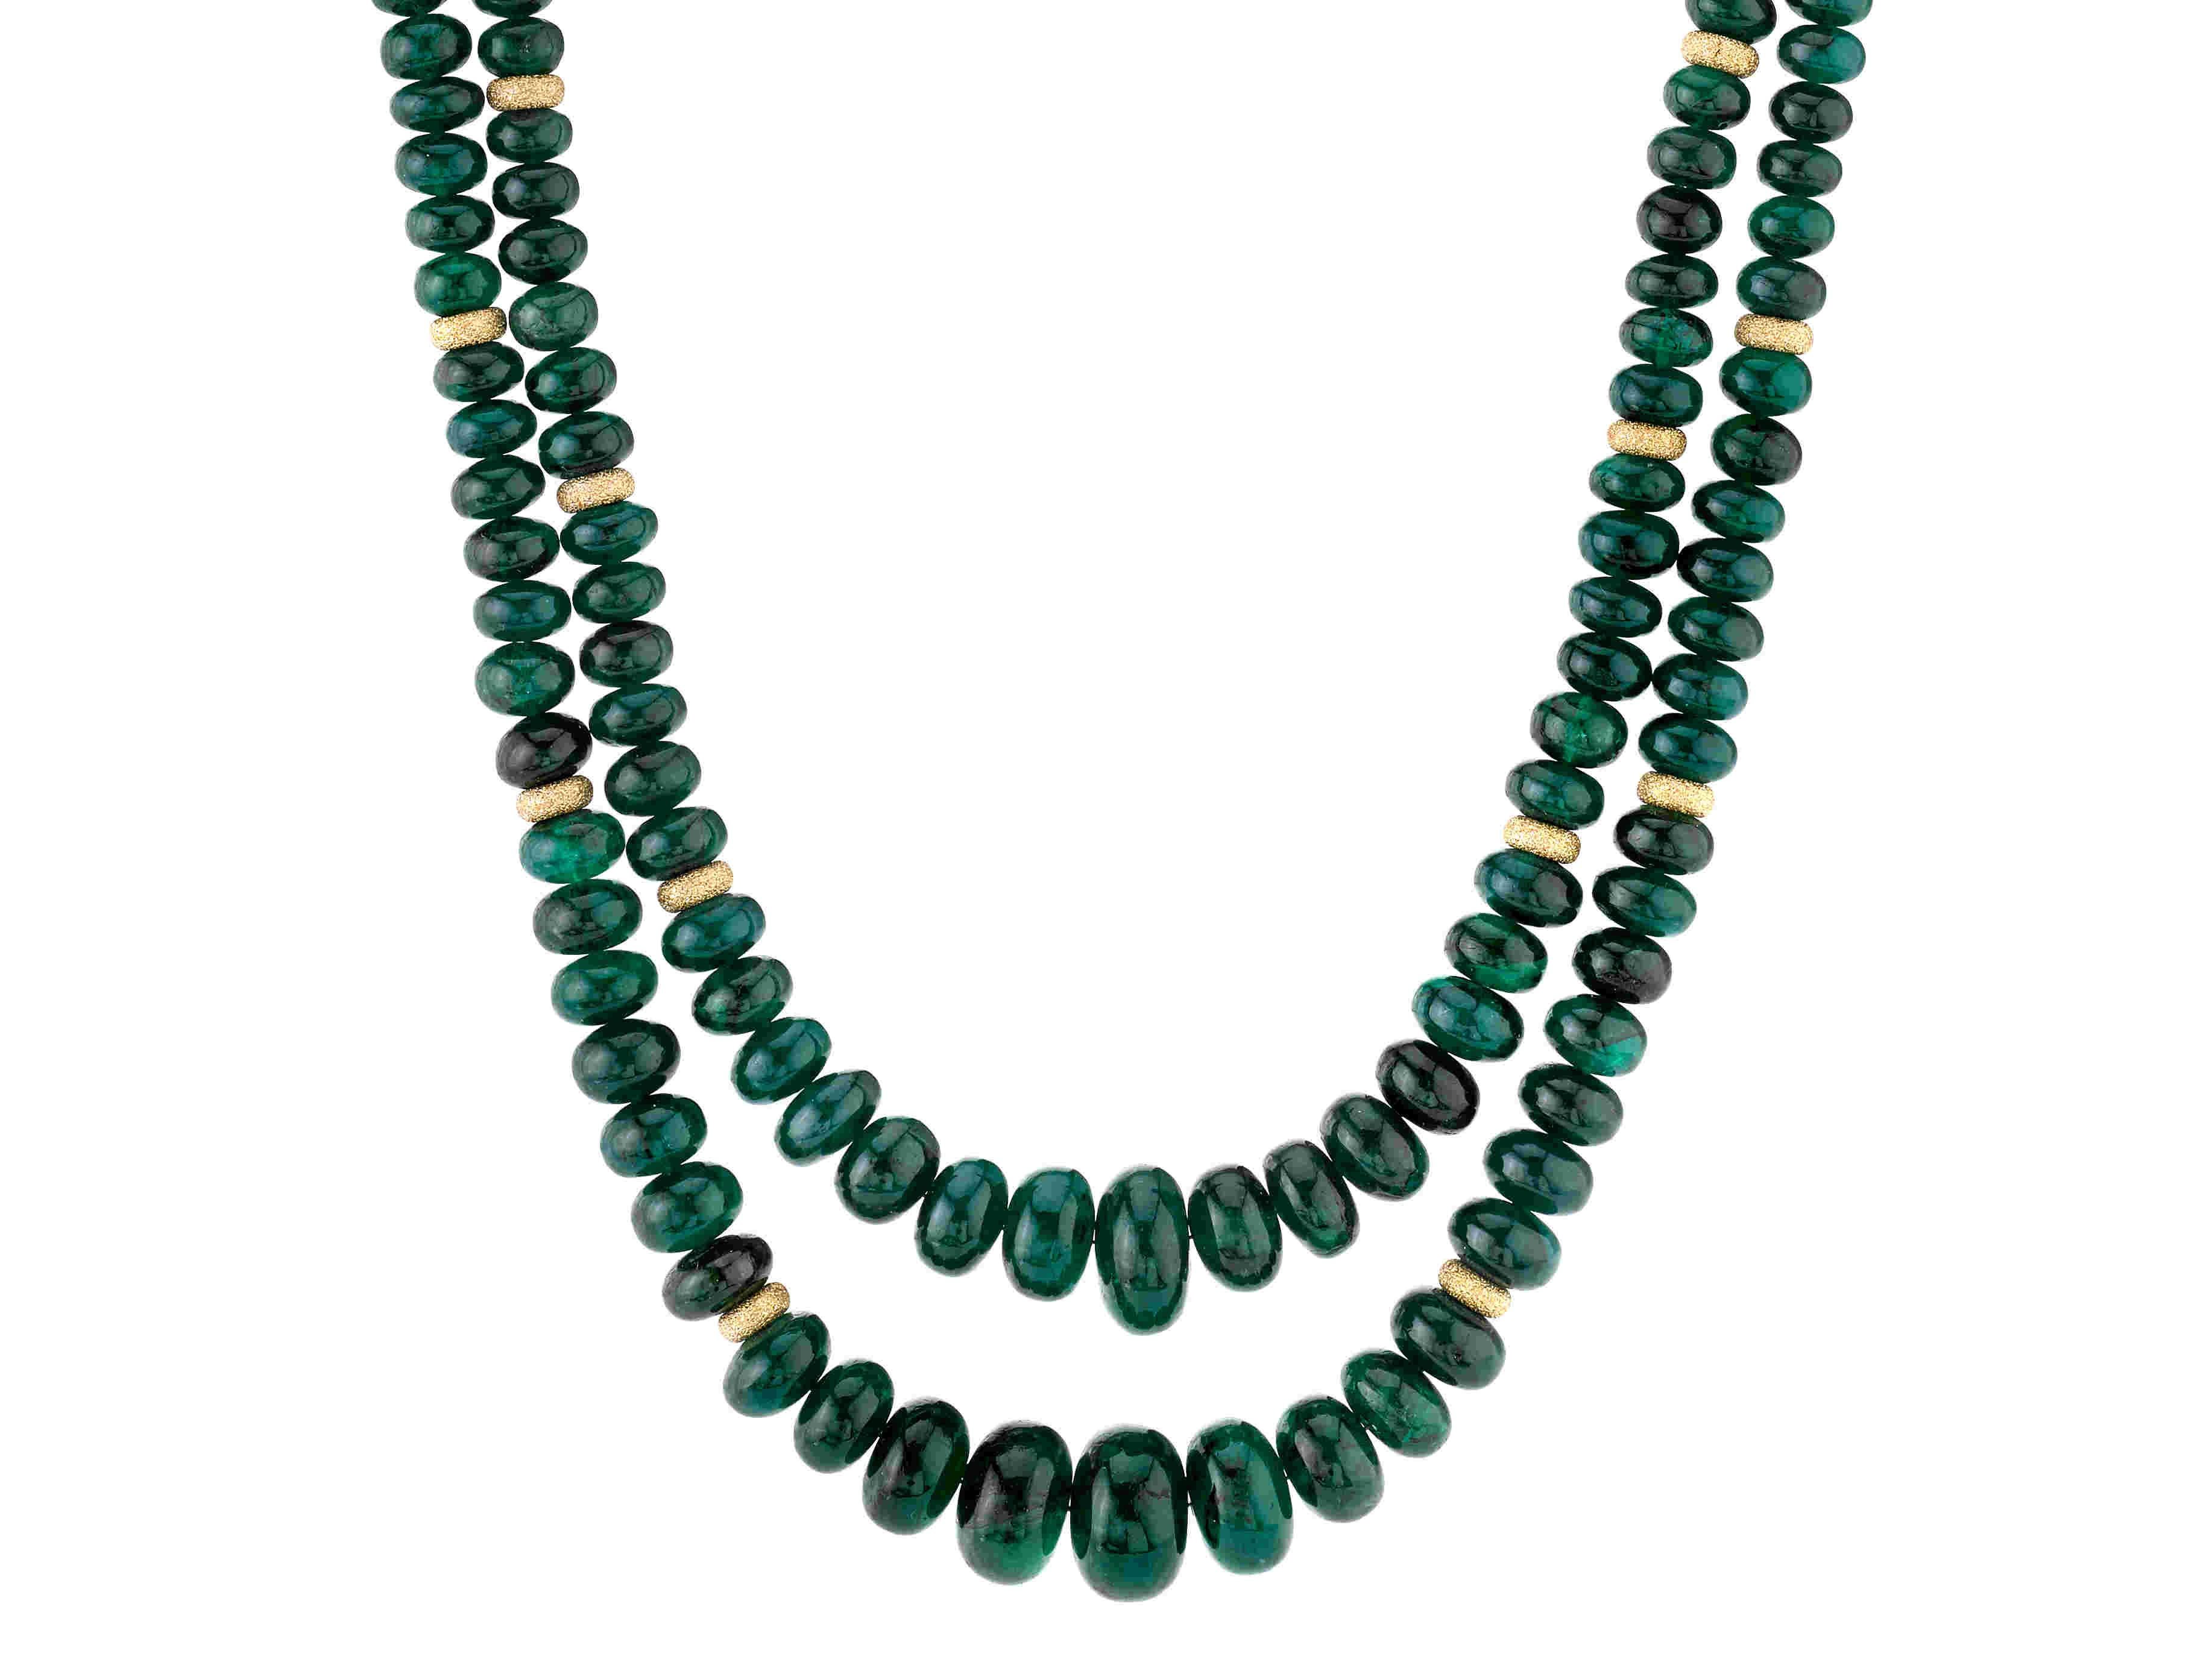 This double strand of emerald beads is stunning! The emerald beads possess both rich color and vibrancy, and are well-matched for color and translucence. Hand strung with 14k yellow gold spacers, this necklace is very versatile; a piece you can wear